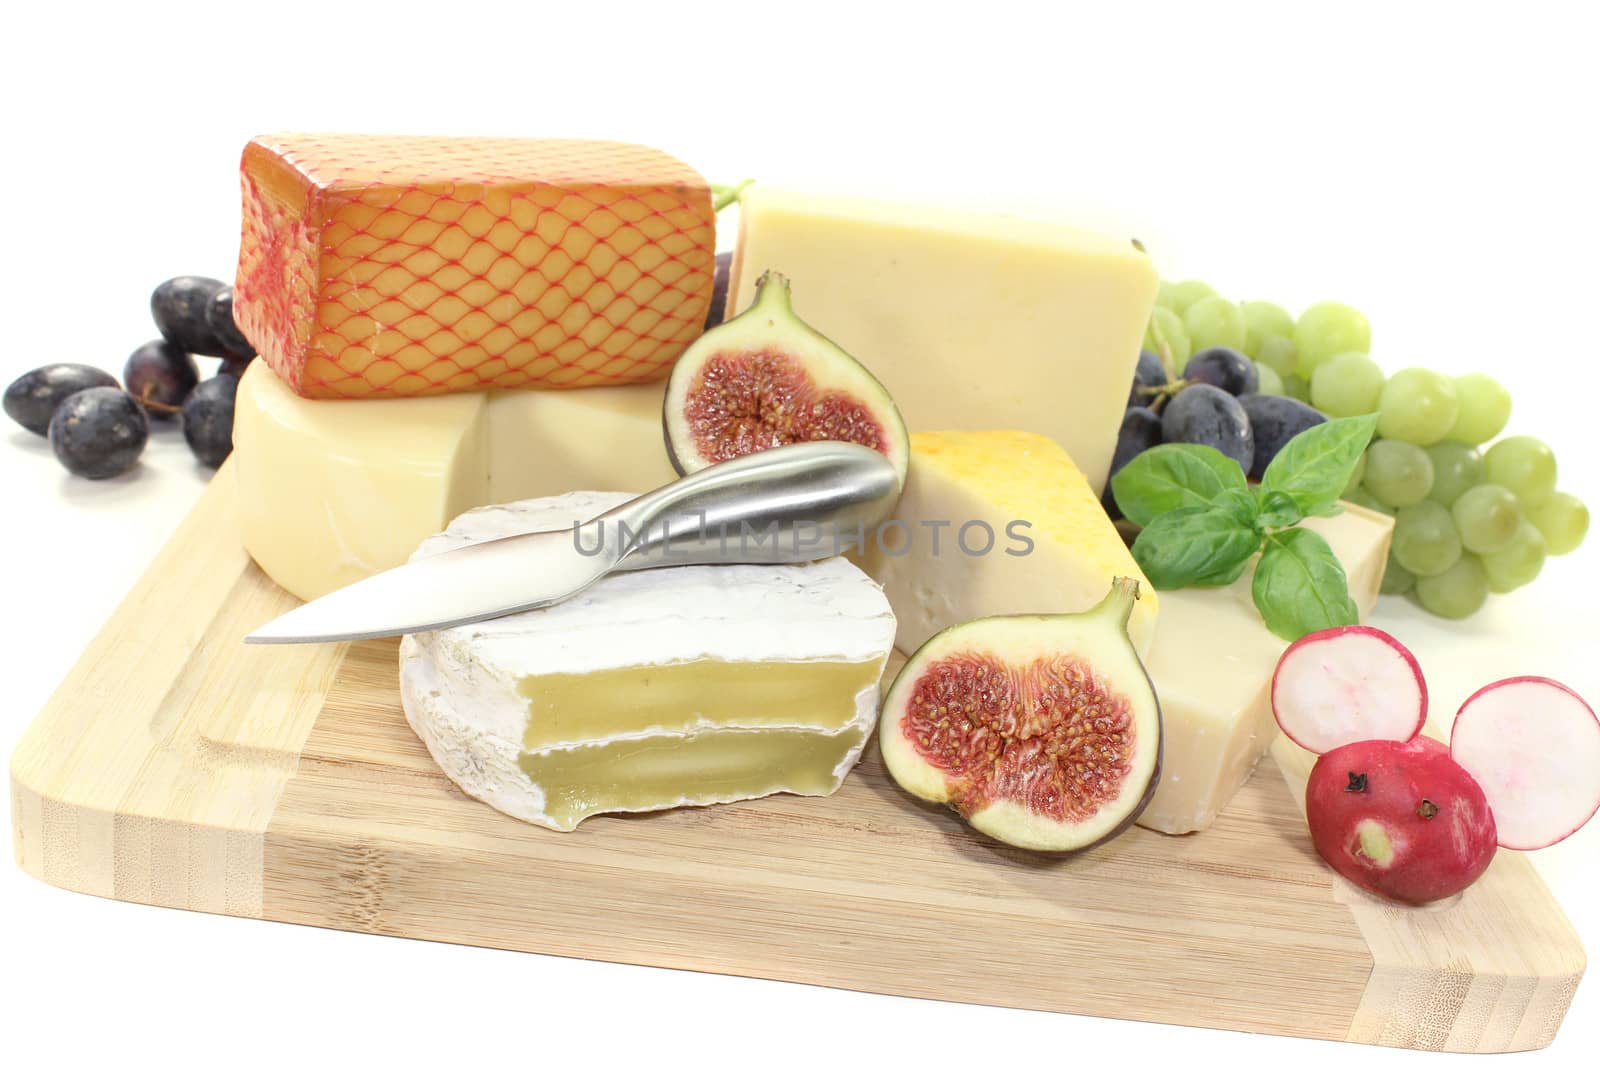 great selection of cheese by discovery